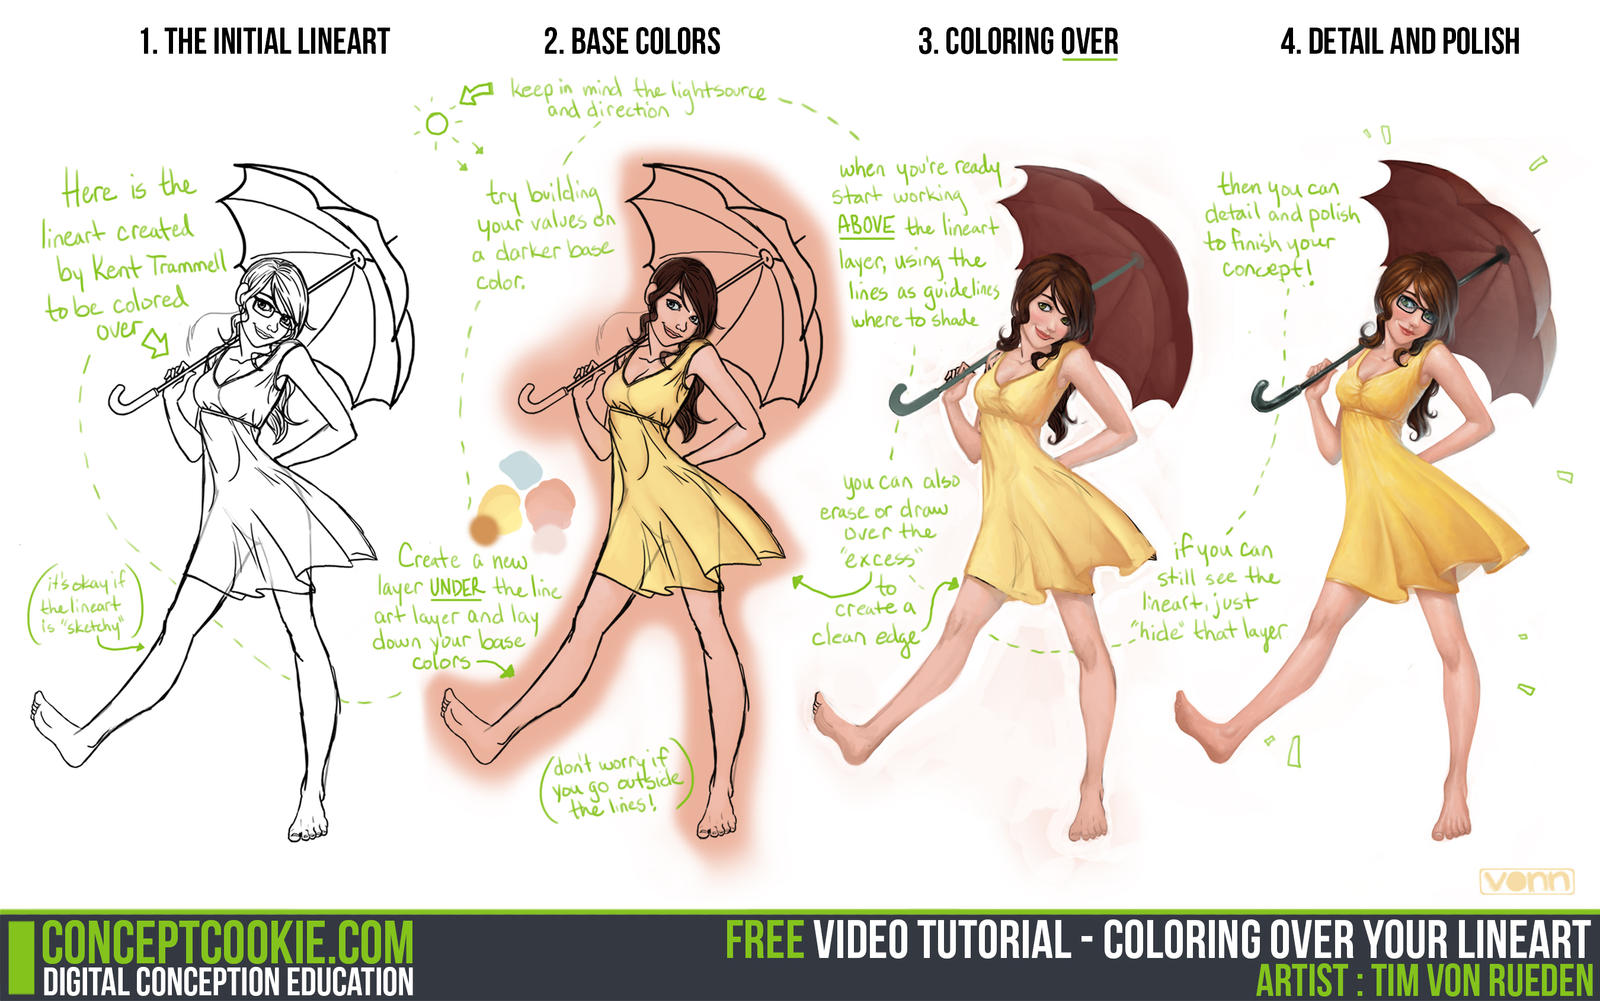 Tutorial Coloring Over Your Lineart by CGCookie on DeviantArt